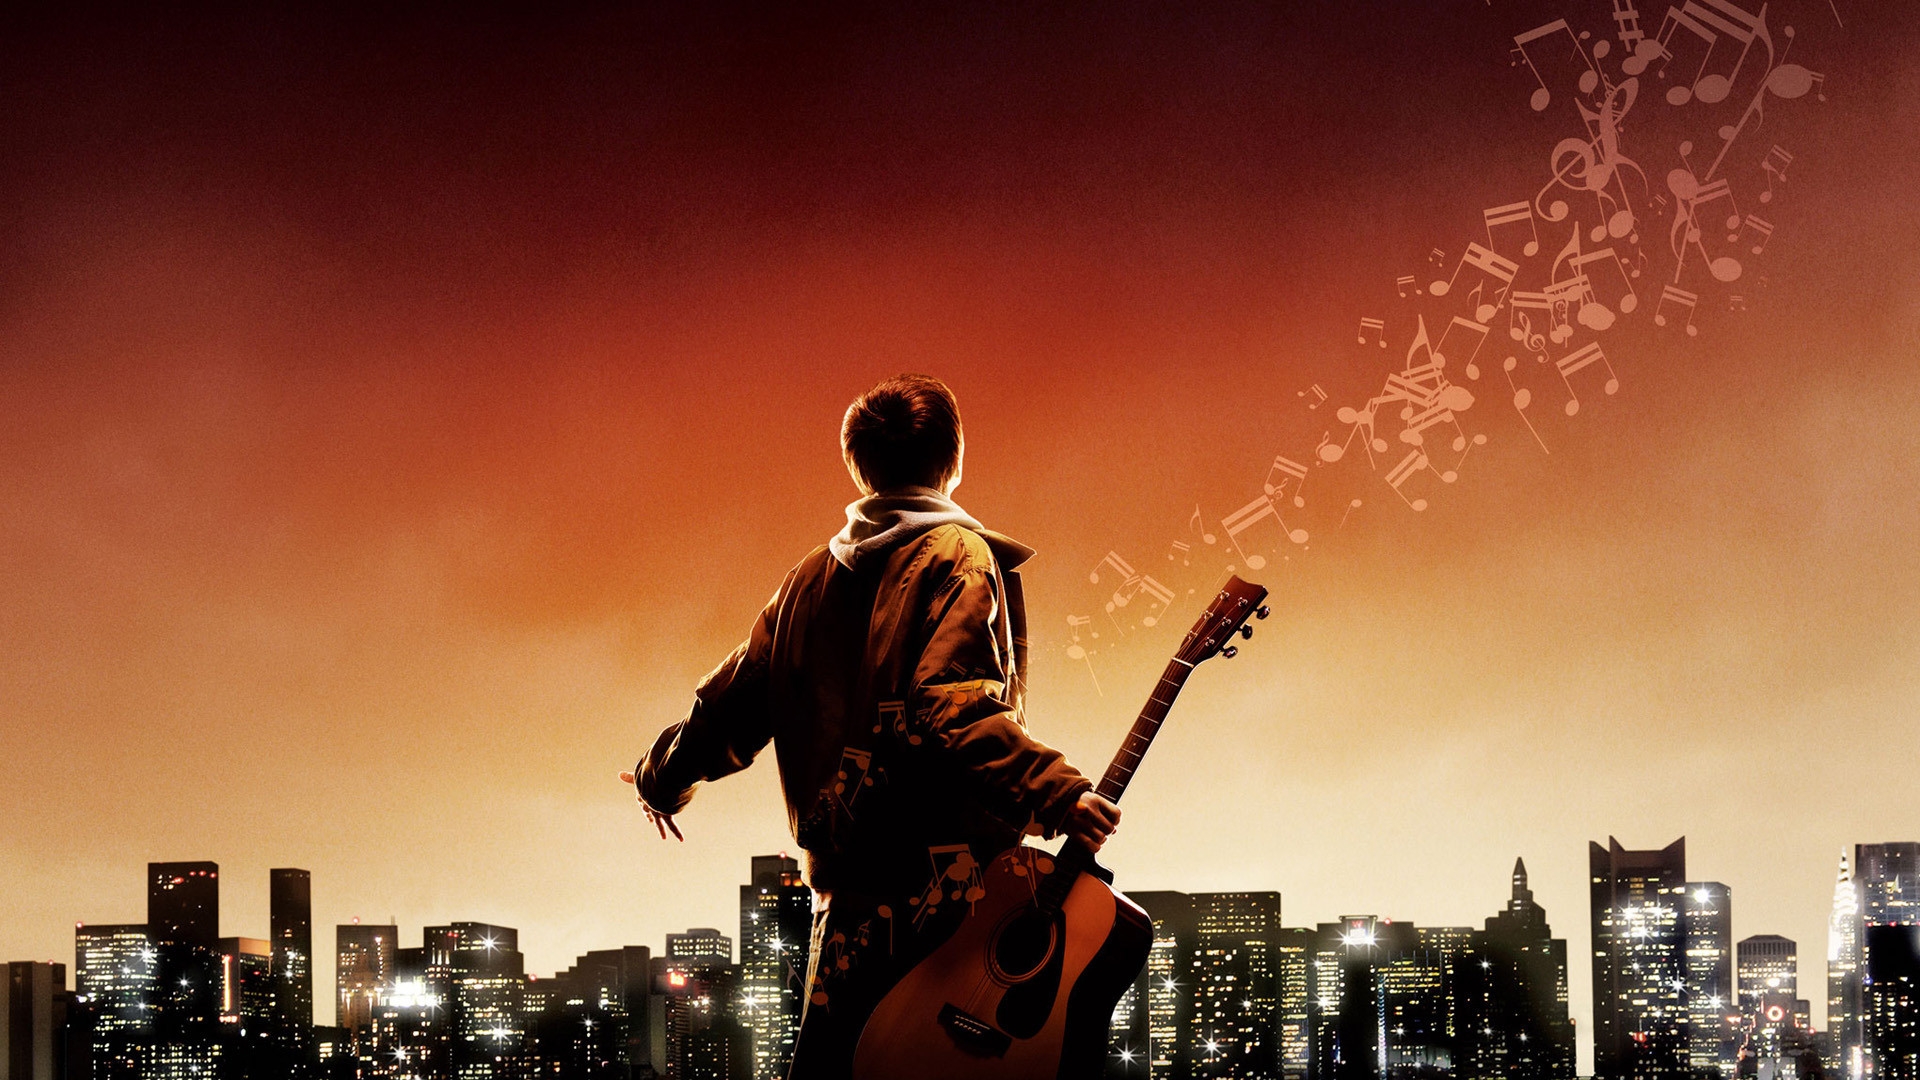 Download Wallpaper 1920x1080 August rush, Guy, Music, Play, City ...